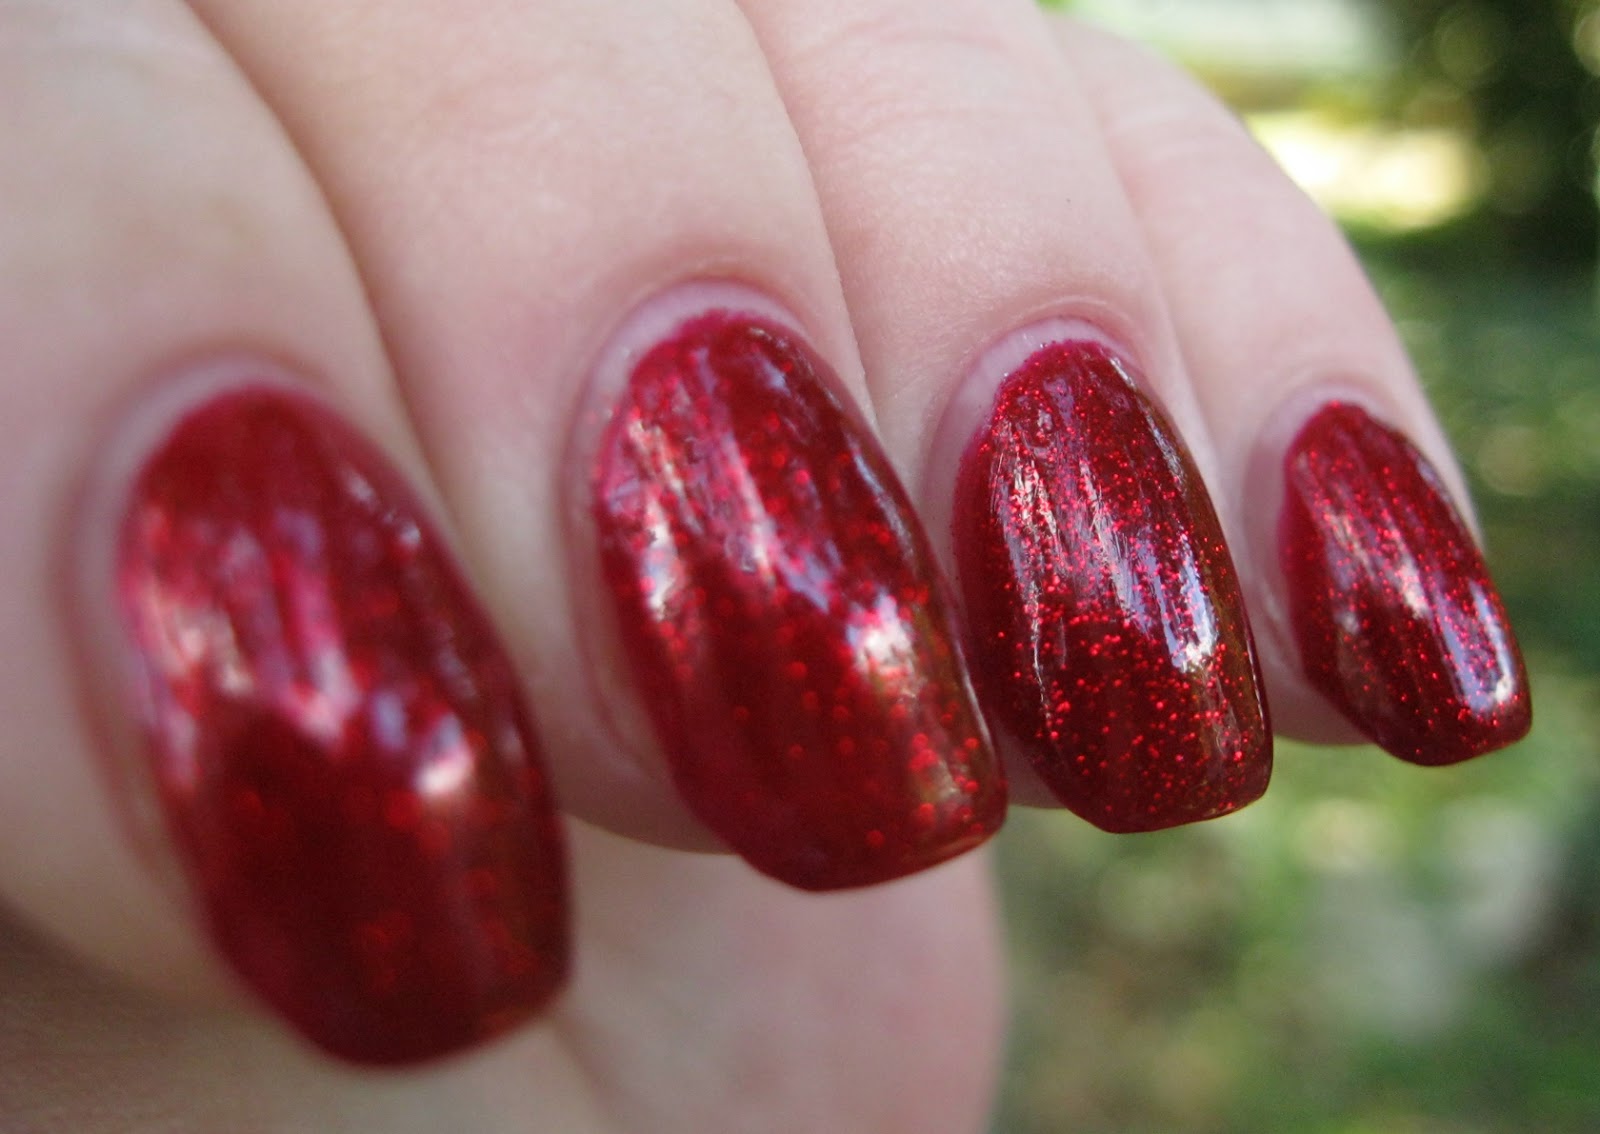 6. China Glaze Nail Lacquer in "Ruby Pumps" - wide 3